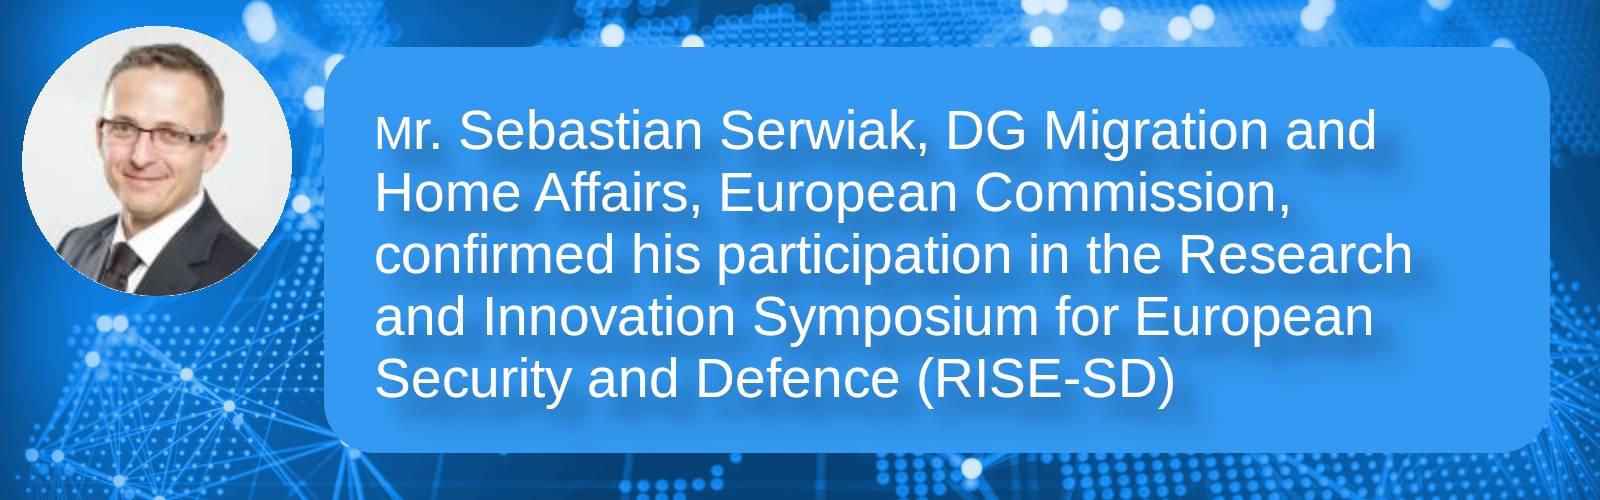 Mr. Sebastian Serwiak, DG Migration and Home Affairs, European Commission, confirmed his participation in the Research and Innovation Symposium for European Security and Defence (RISE-SD)